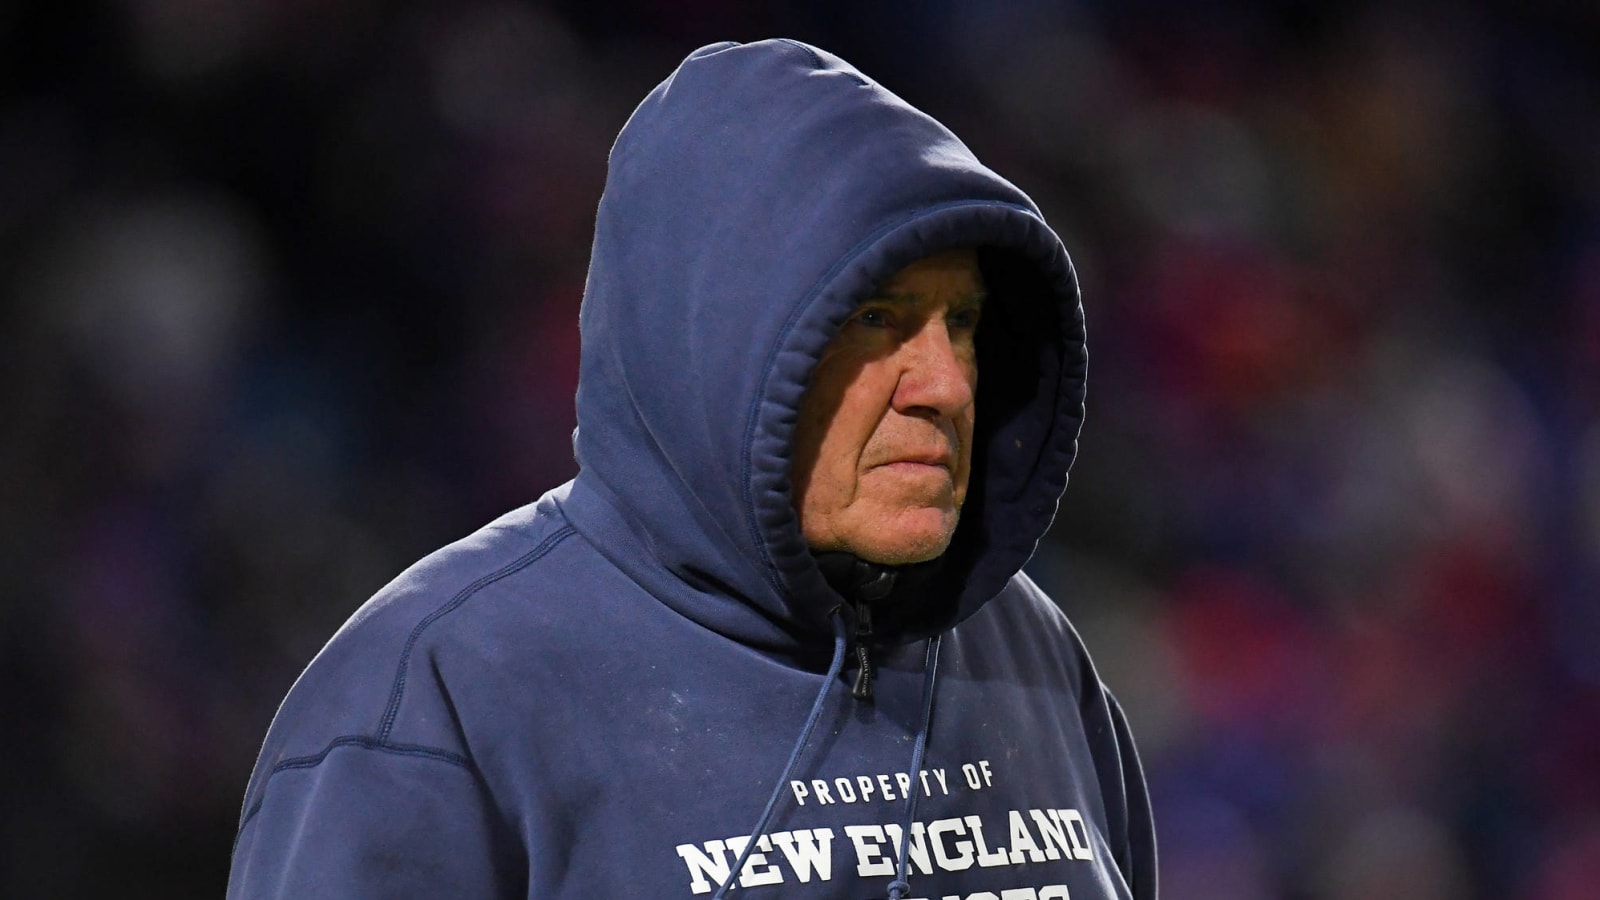 Bills accomplished one incredibly rare feat against Belichick